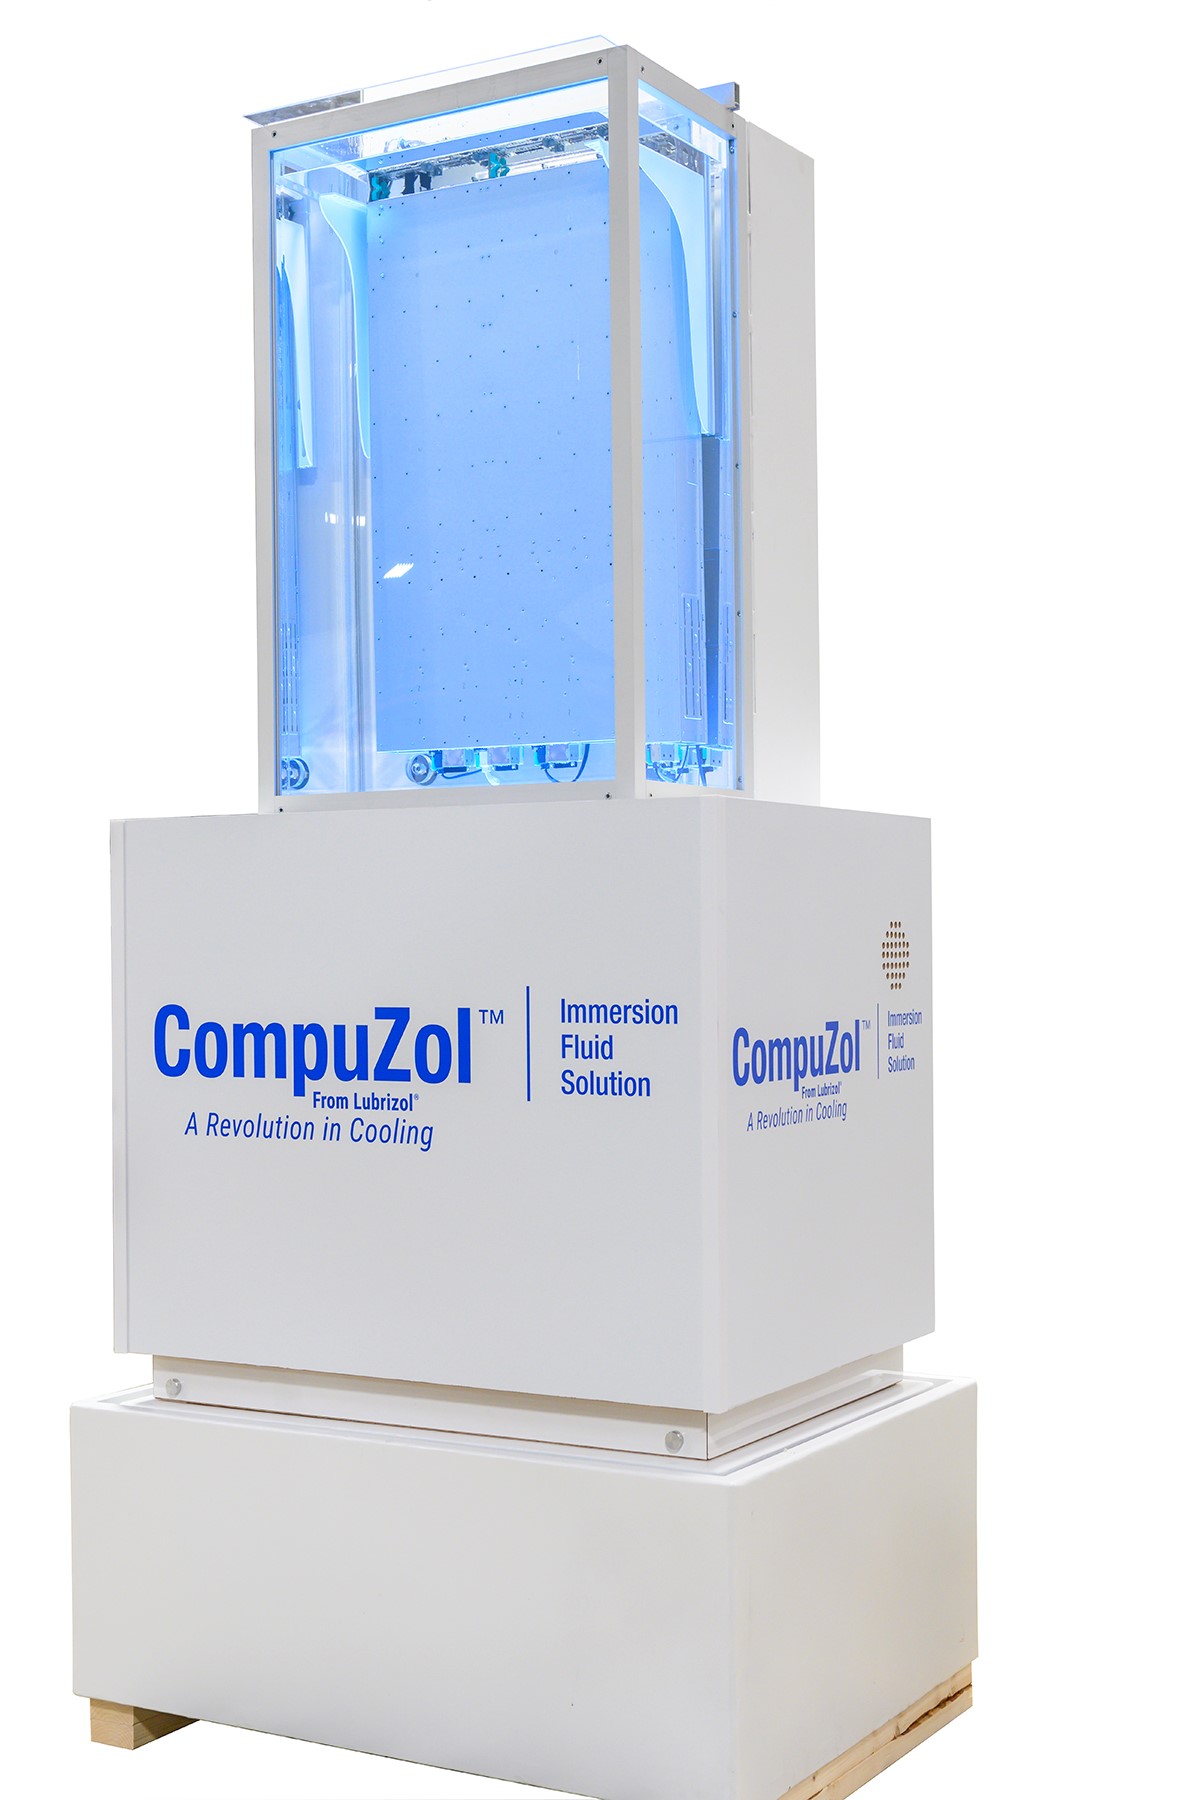 Immersion-ready server from Intel® immersed in custom-built glass unit filled with CompuZol immersion cooling fluid